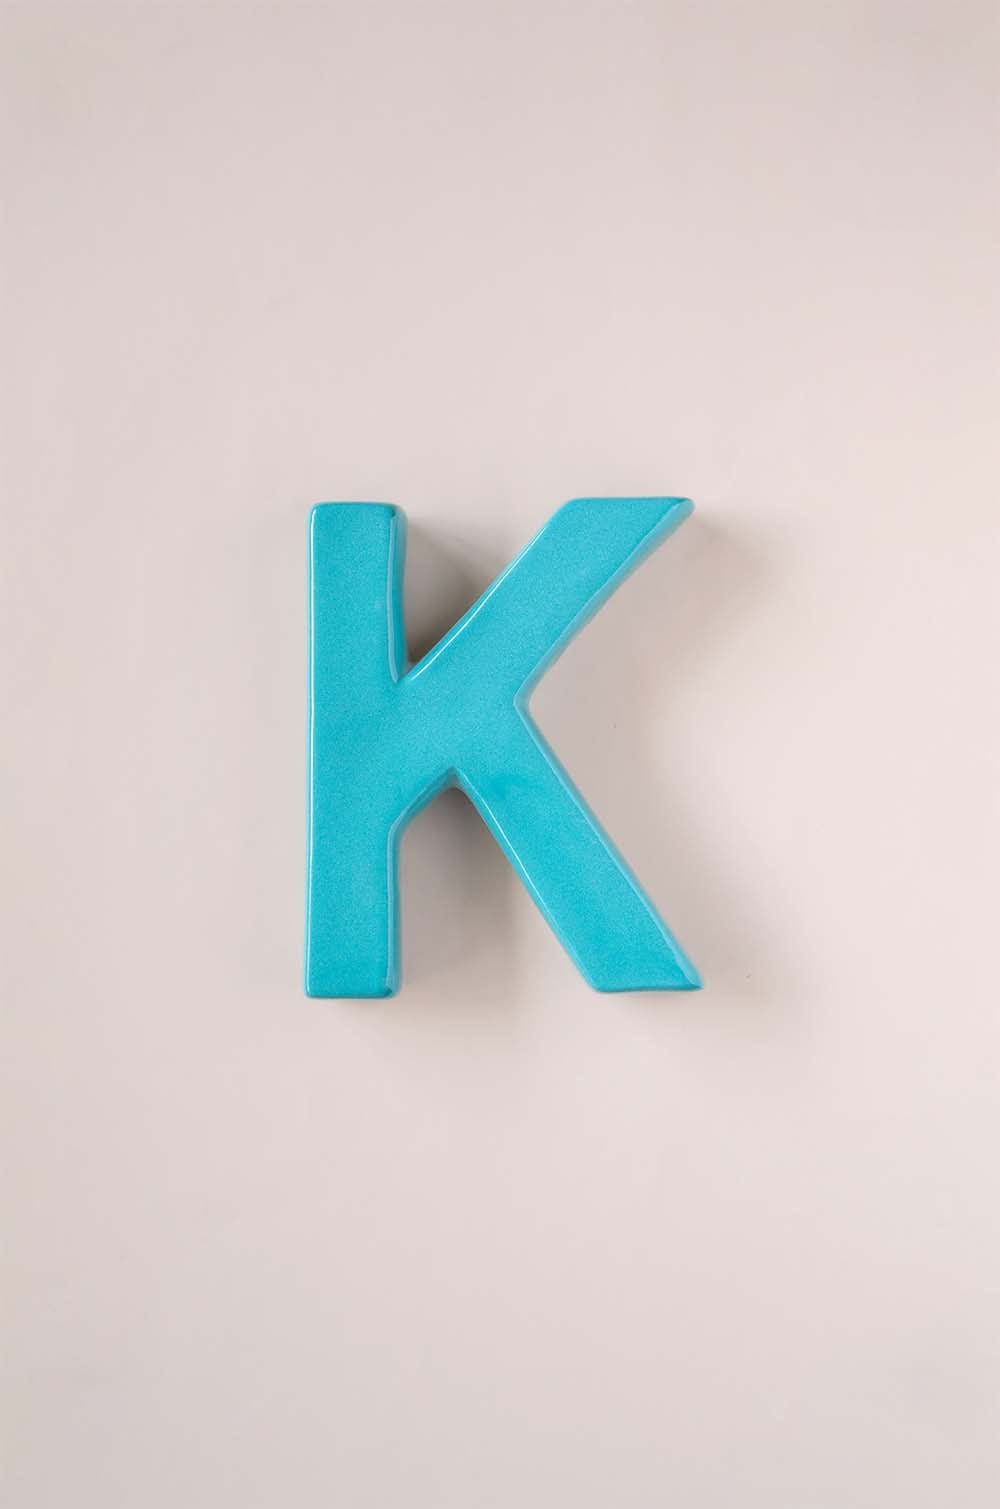 K Mottled Mono Wall Hanging Teal A to Z